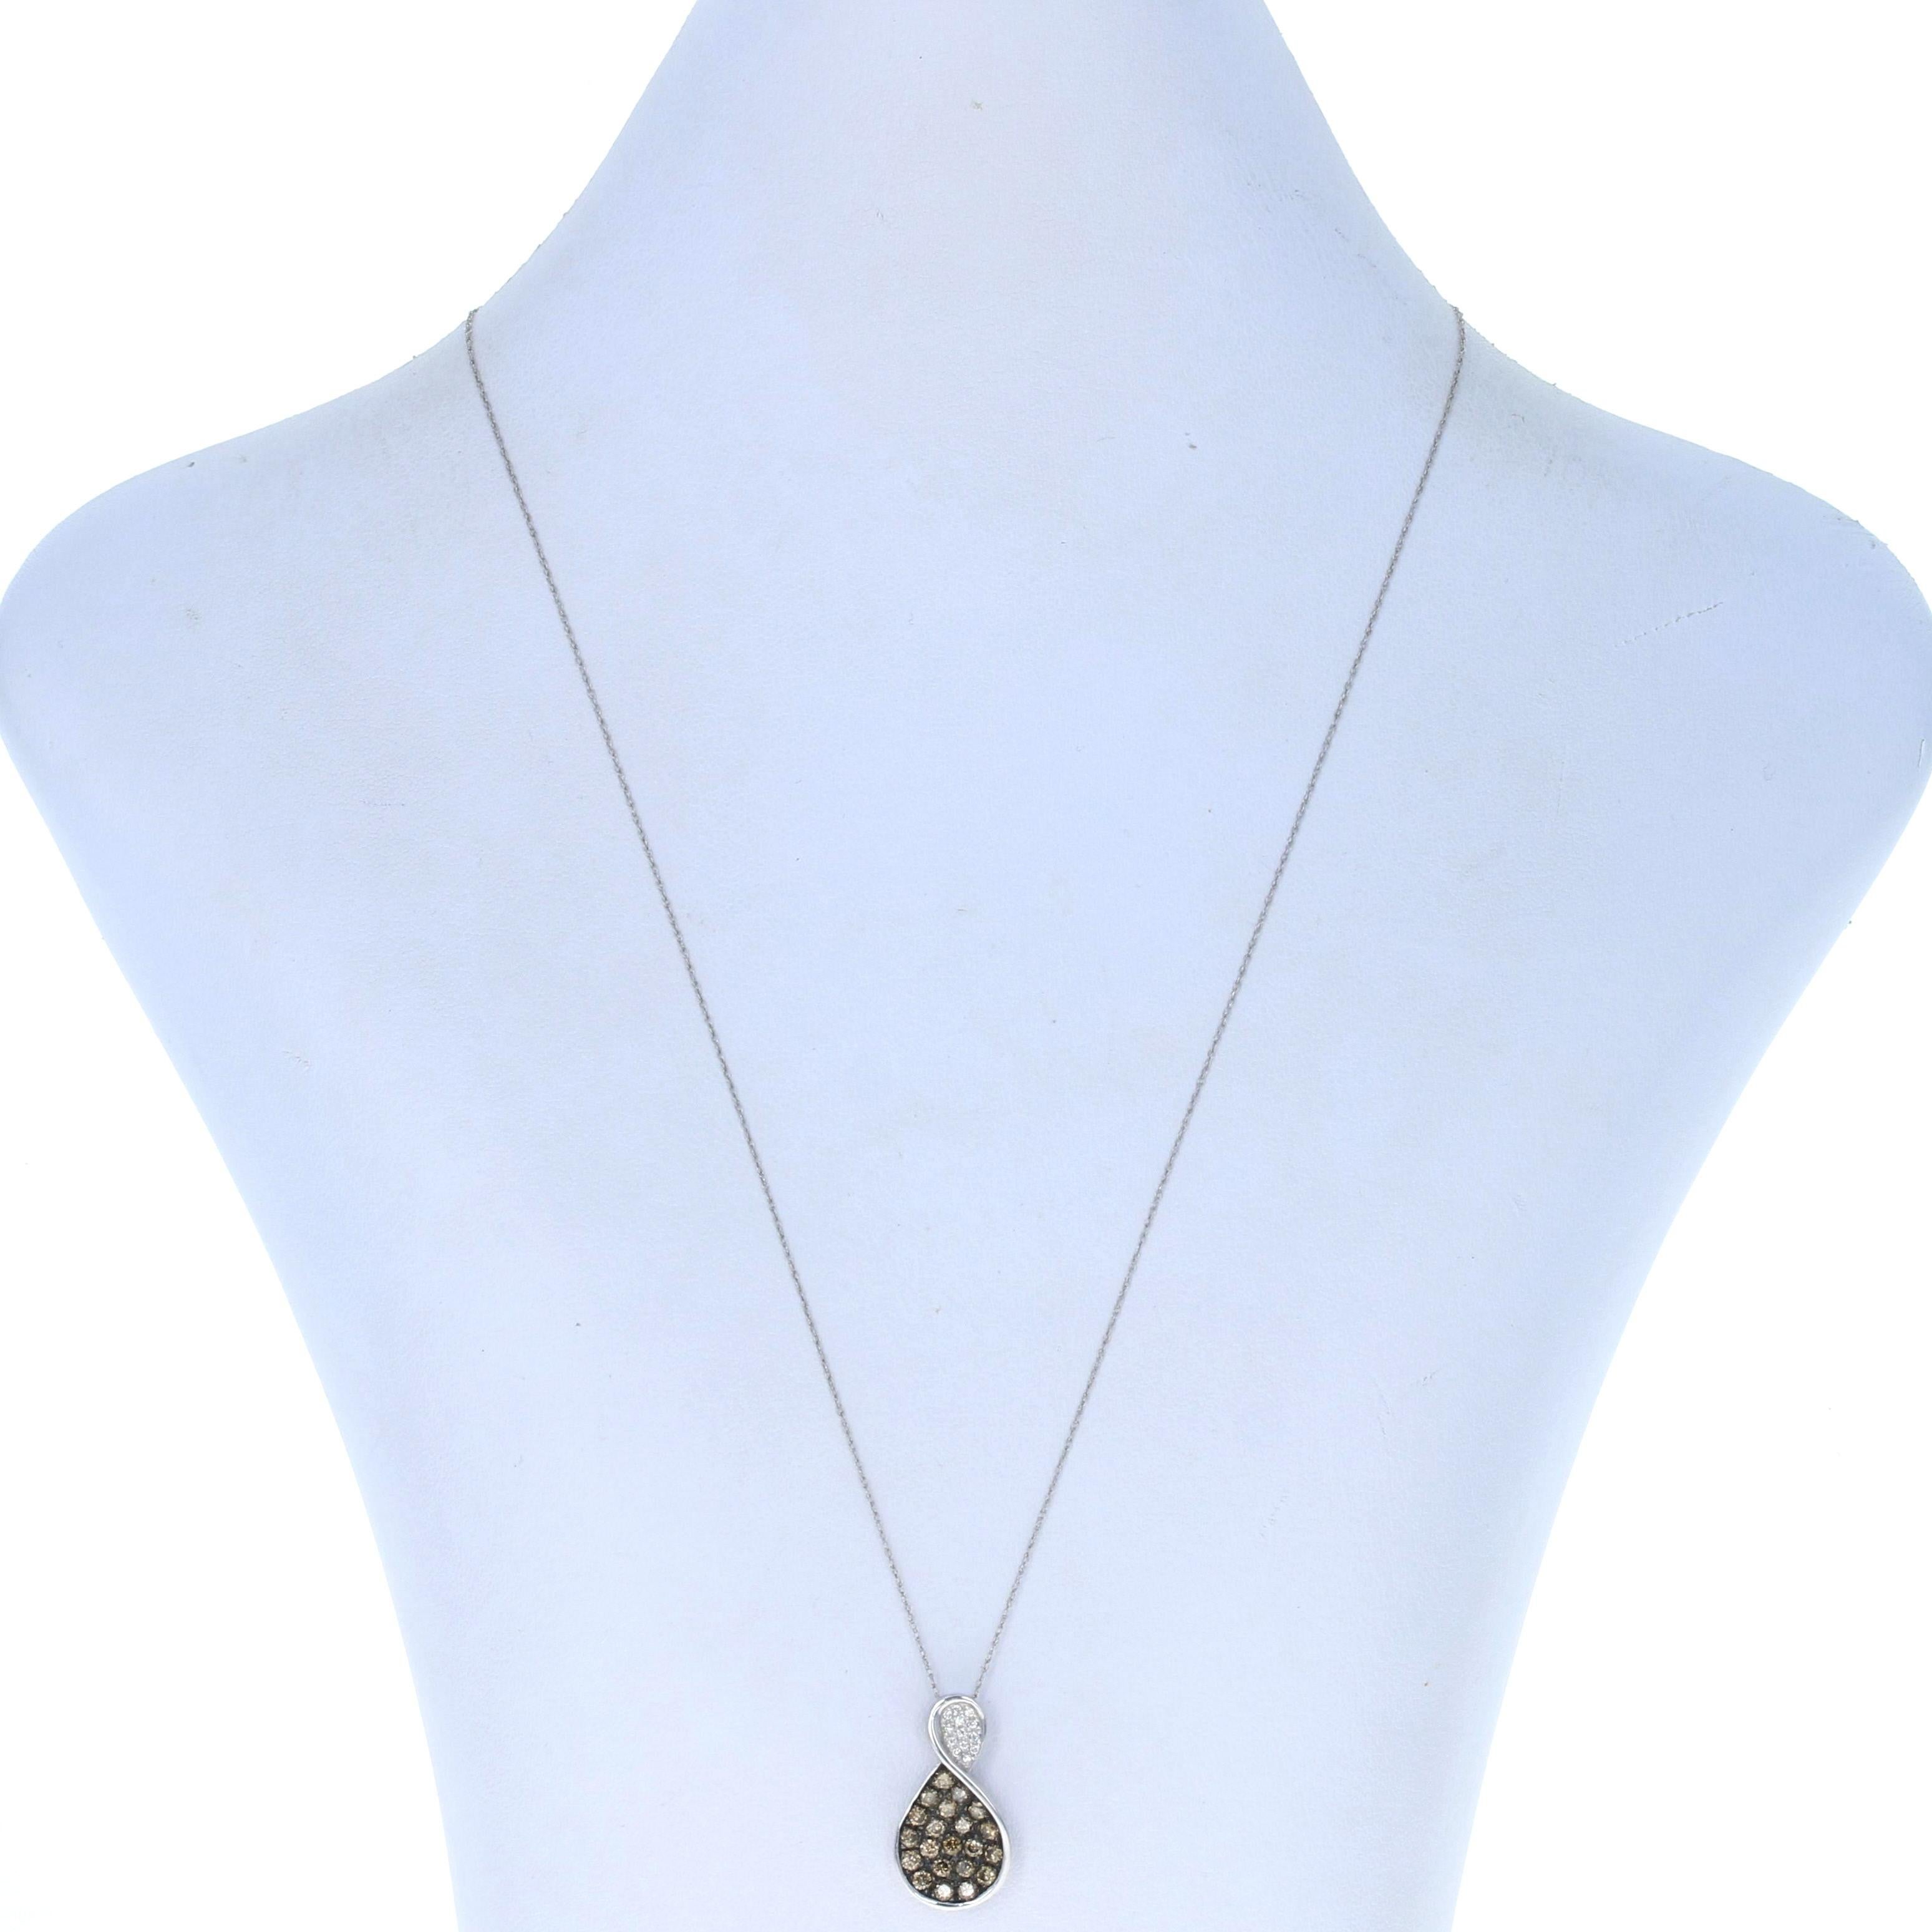 Is there a special birthday or milestone anniversary circled on your calendar? Make this exquisite necklace the highlight of the celebration! Fashioned in 14k white gold, this LeVian Chocolatier piece (WIML39) features a fine wheat chain and a